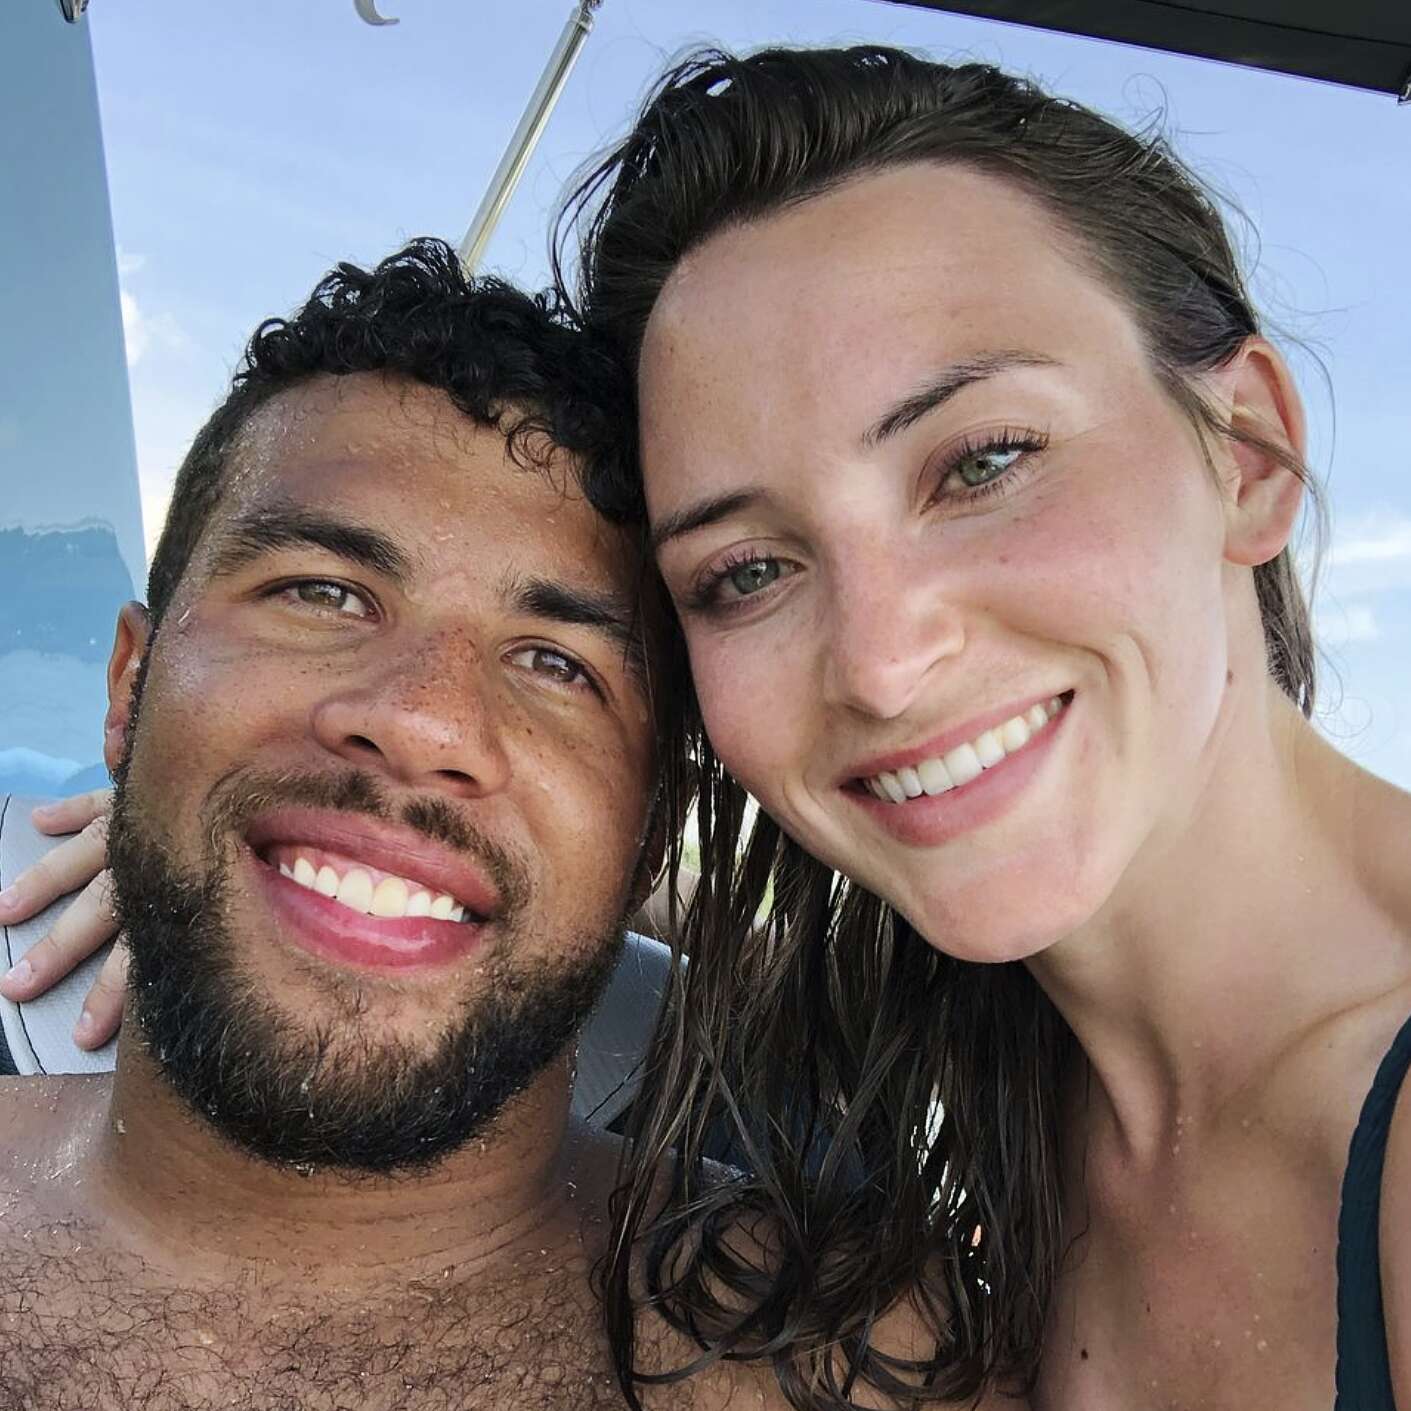 Bubba Wallace and girlfriend Amanda Wallace - from Wallaces FB page.